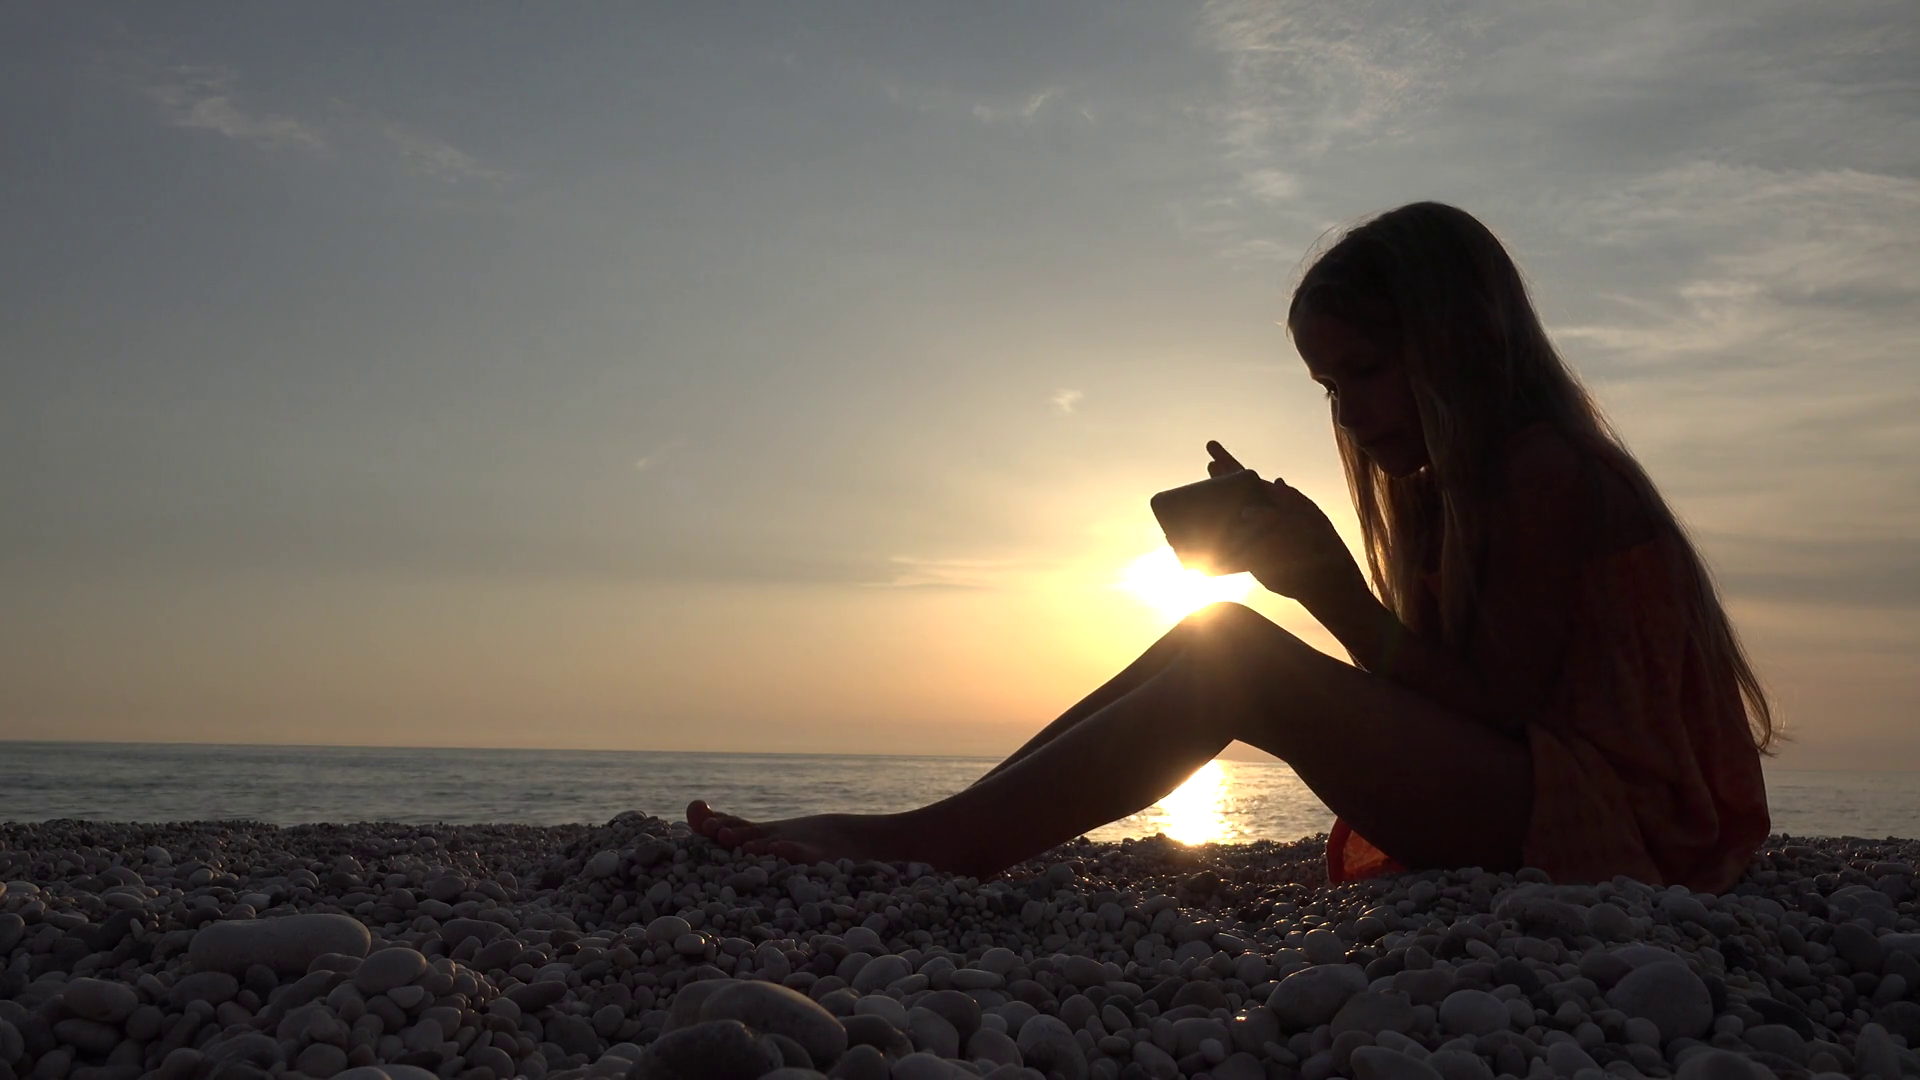 4K Child Playing Smartphone on Beach, Sunset Sea, Girl Silhouette on ...